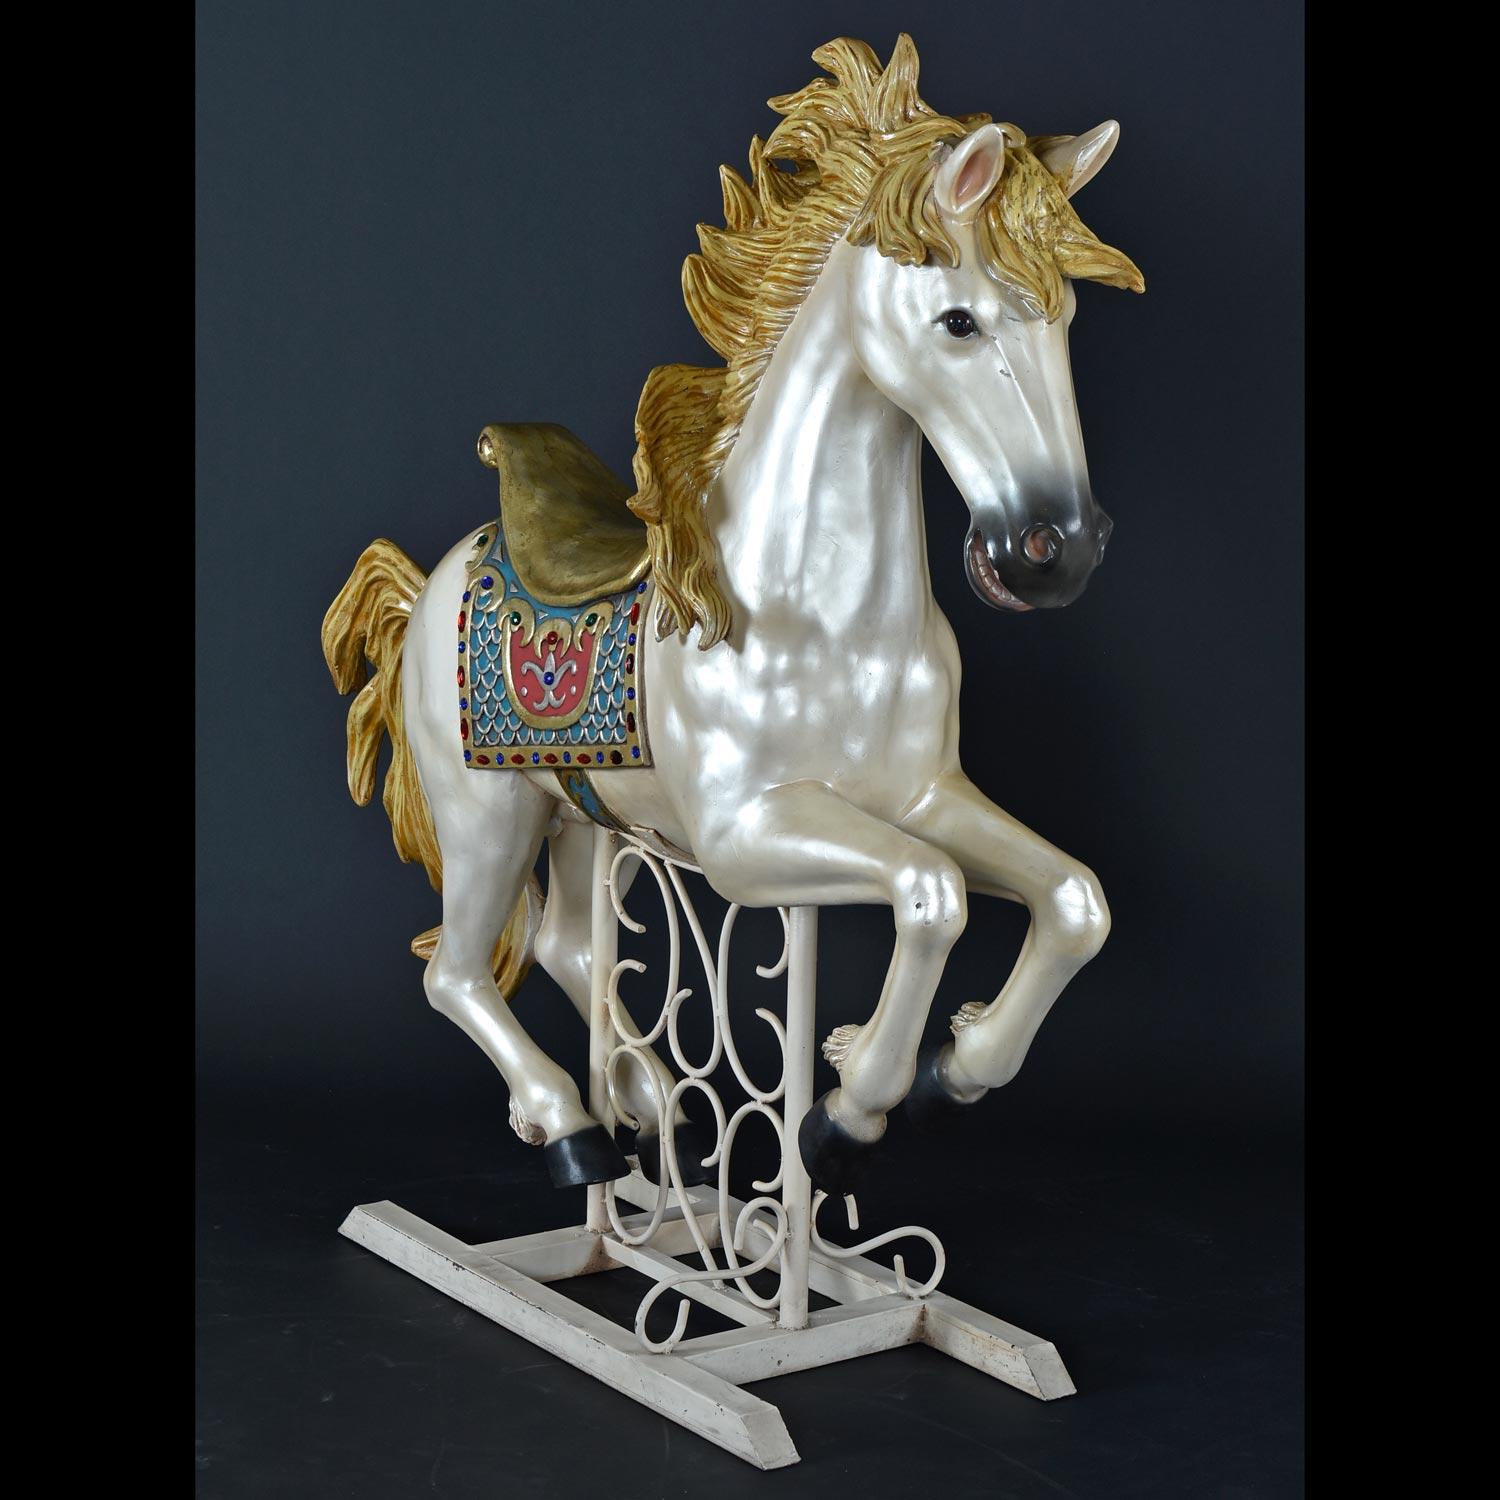 Perfectly captured in all it’s glory, this vintage fiberglass carousel horse is sure to gallop your heart. One look at this radiant mare, and you’ll see why. The animal’s strength and beauty is celebrated with expert anatomical modeling. The dynamic